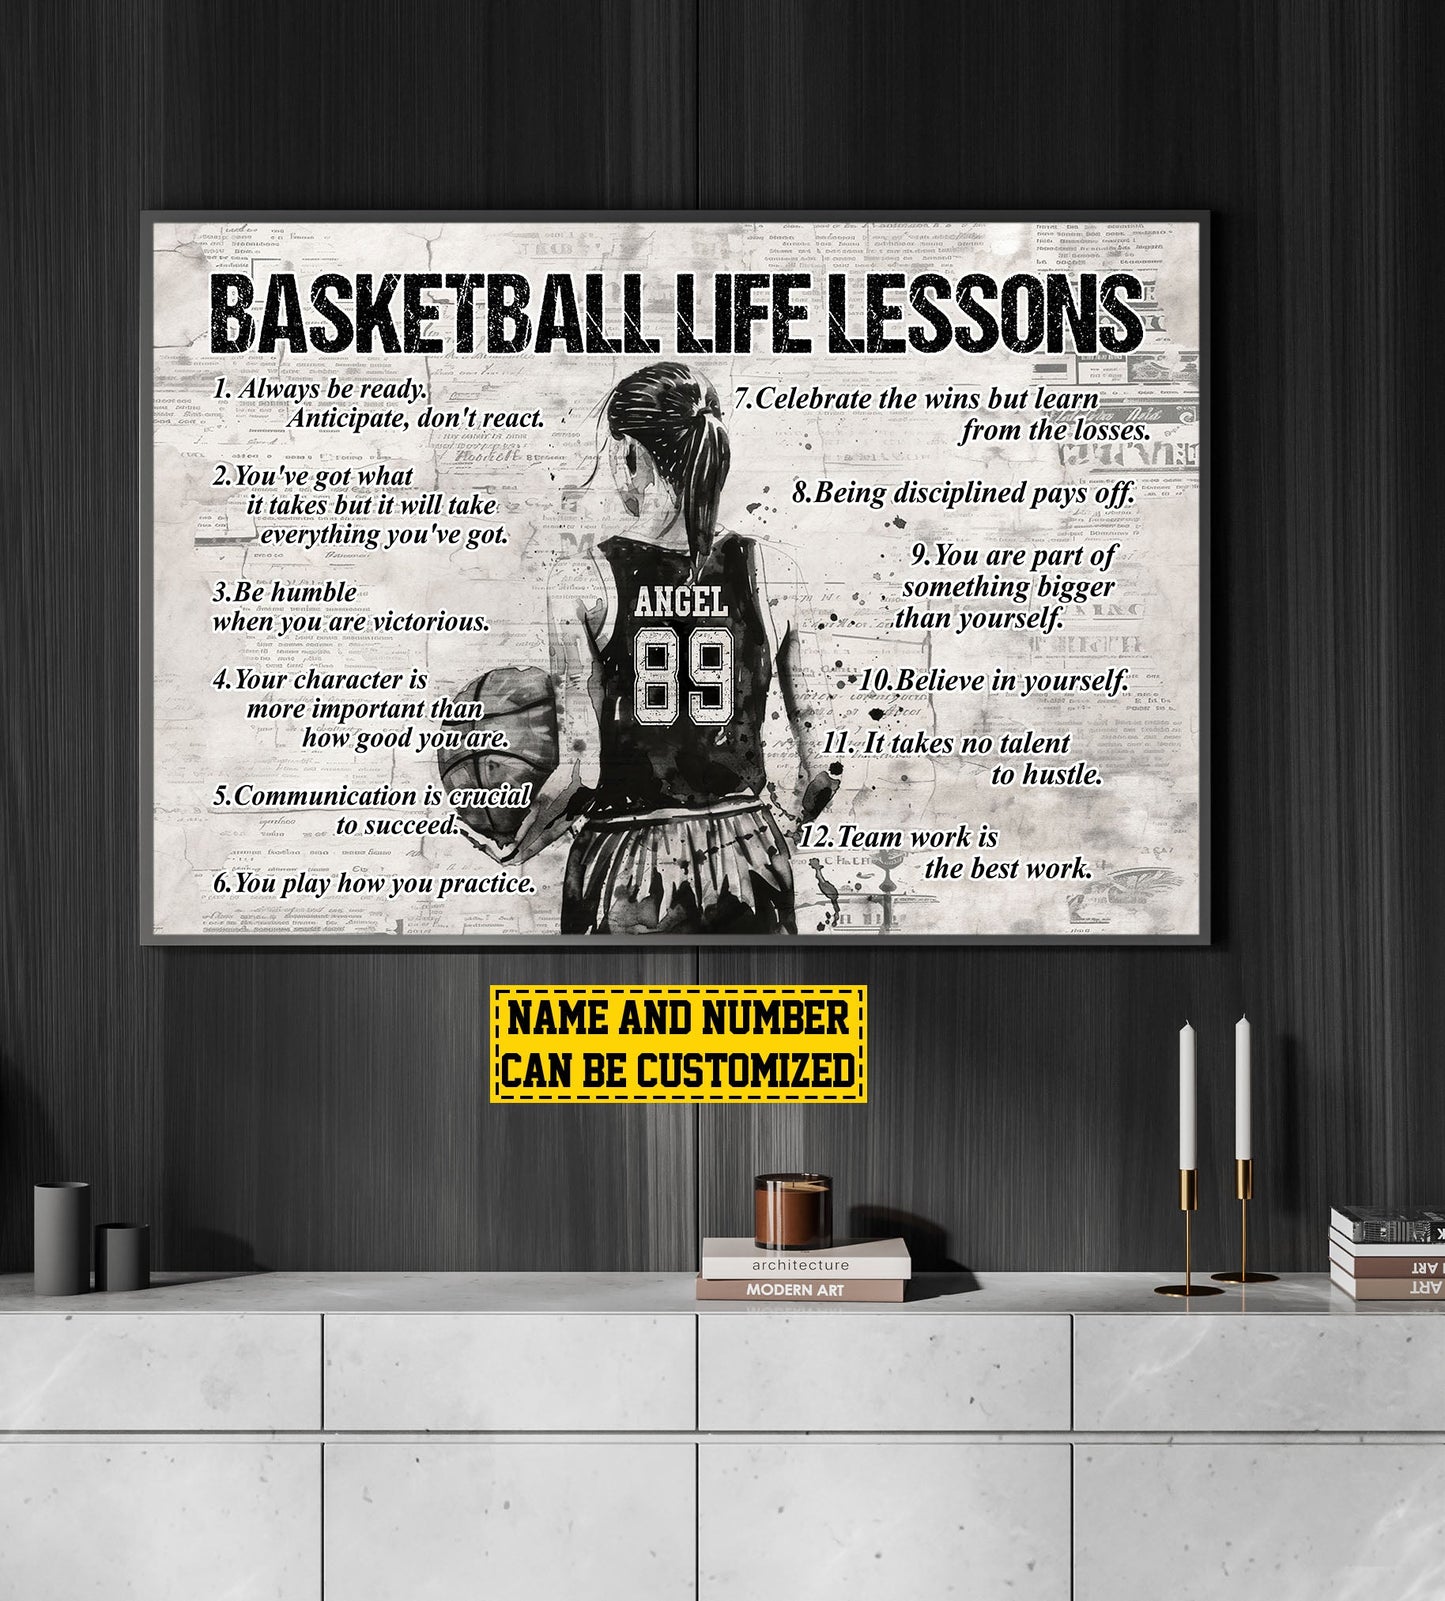 Basketball Life Lessons, Personalized Motivational Basketball Girl Canvas Painting, Inspirational Quotes Wall Art Decor, Poster Gift For Basketball Lovers